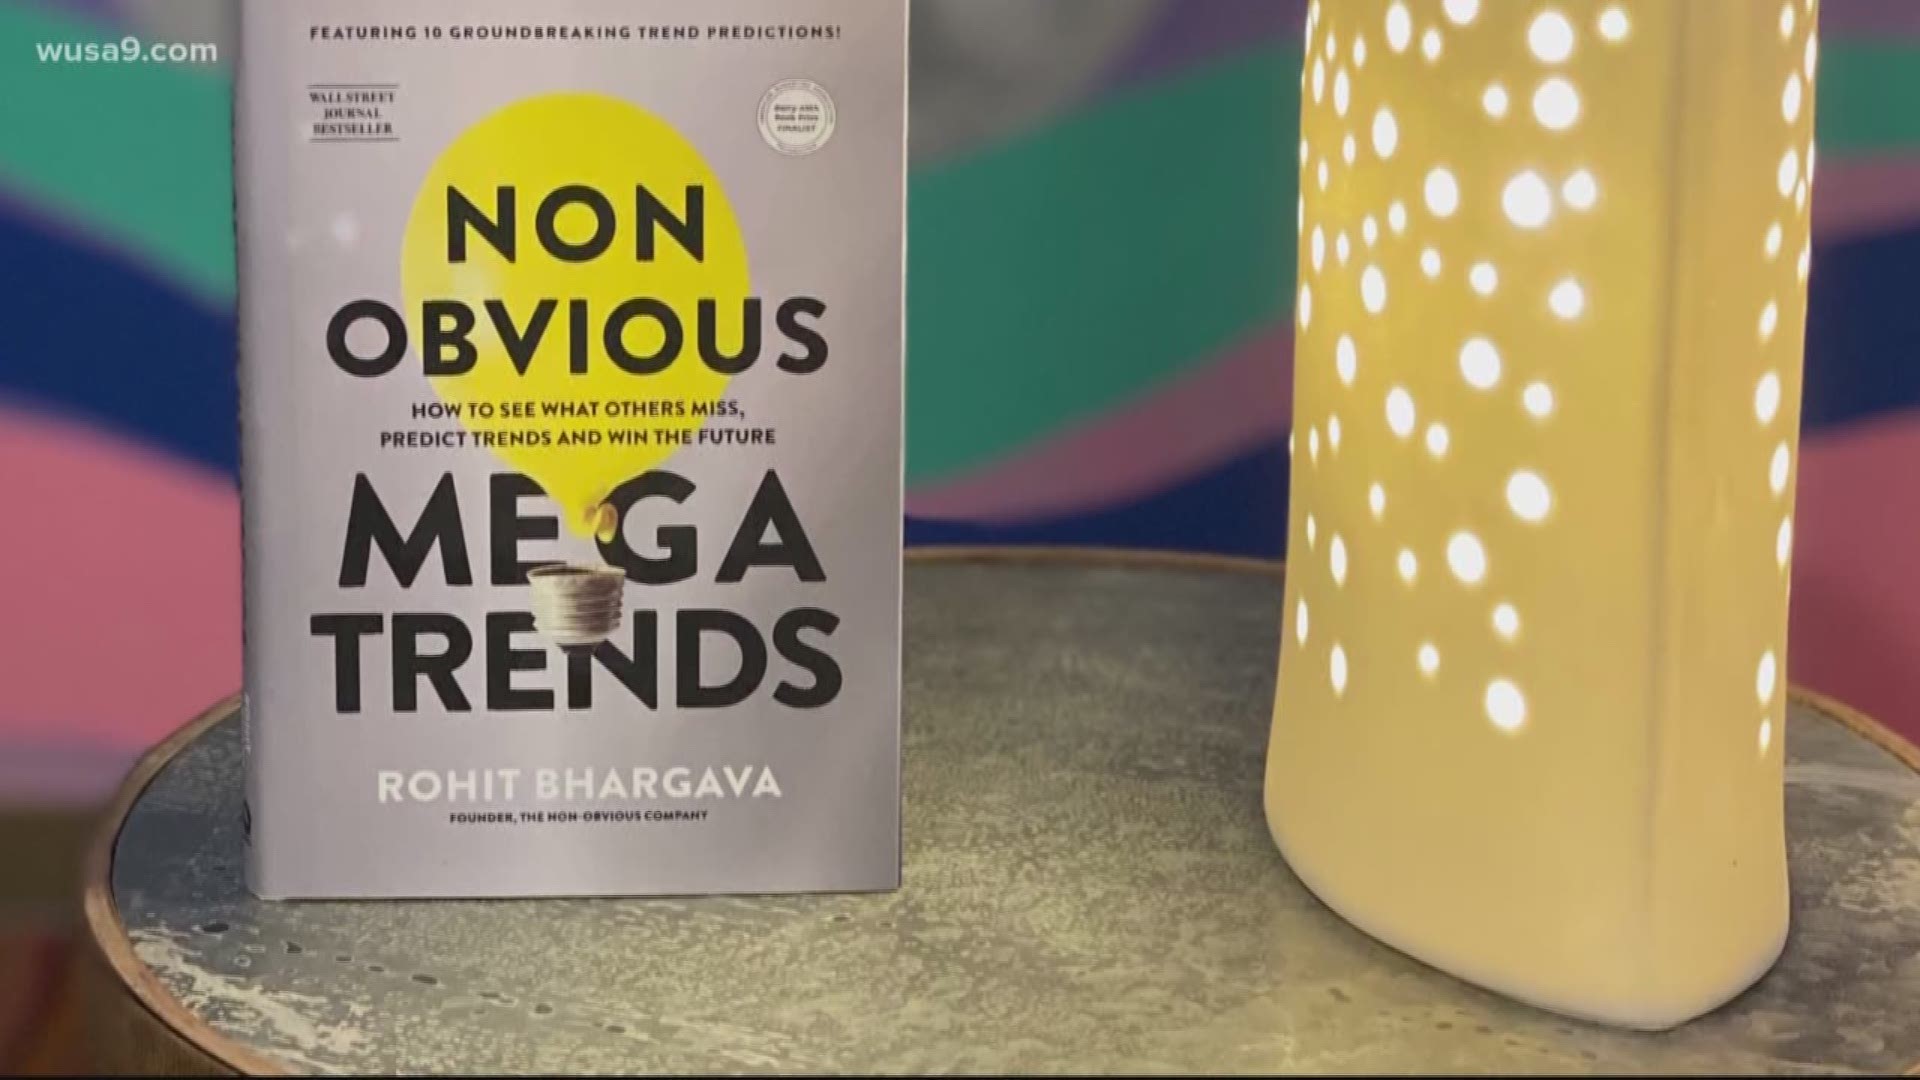 His book 'Non-Obvious Megatrends' has been a Wall Street Journal bestseller. It features 10 big new Megatrend predictions.